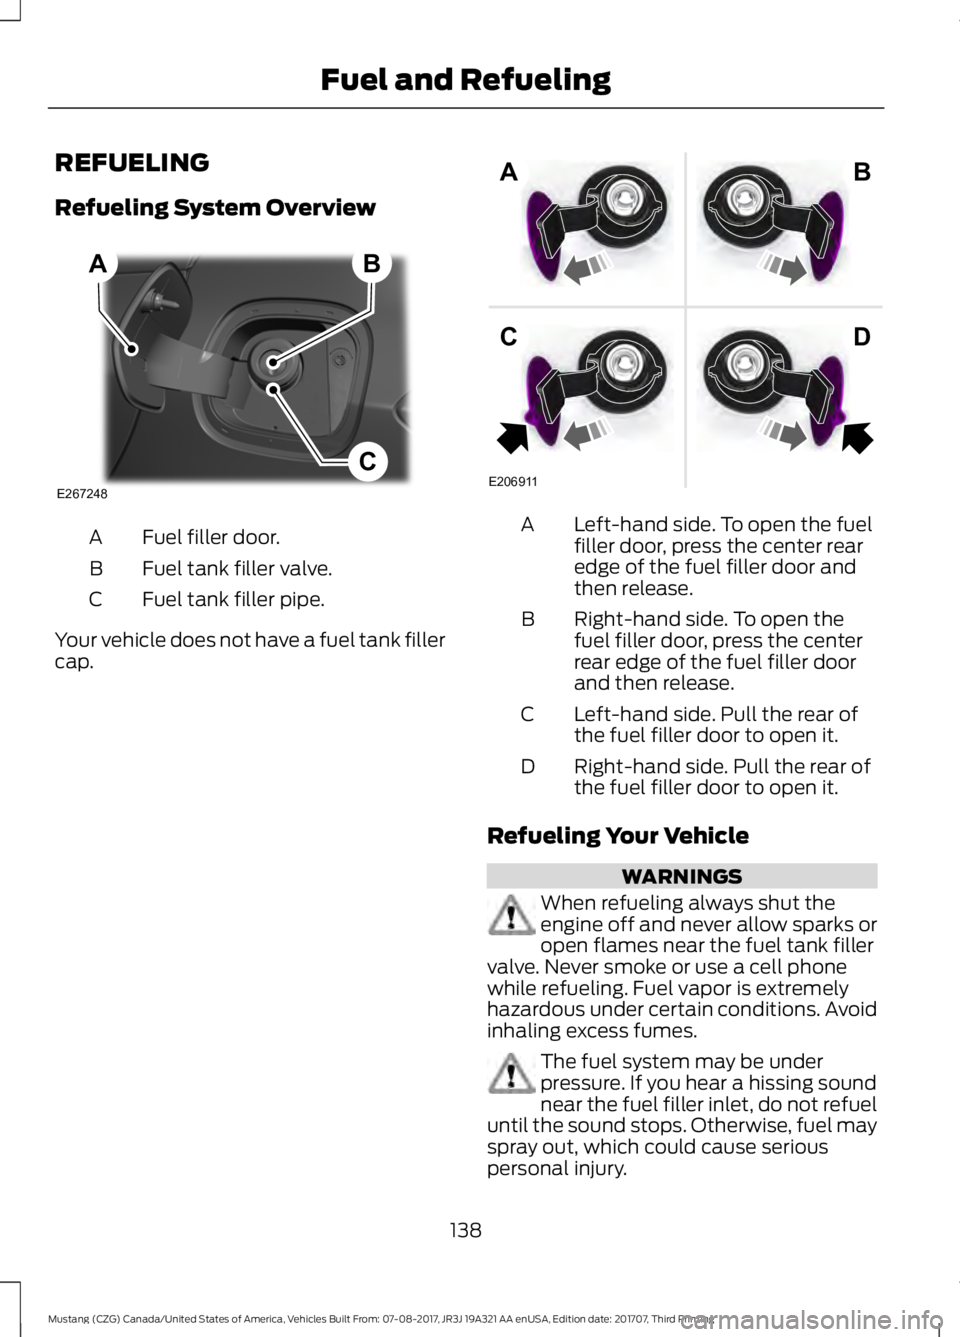 FORD MUSTANG 2018   Owners Manual REFUELING
Refueling System Overview
Fuel filler door.
A
Fuel tank filler valve.
B
Fuel tank filler pipe.
C
Your vehicle does not have a fuel tank filler
cap. Left-hand side. To open the fuel
filler do